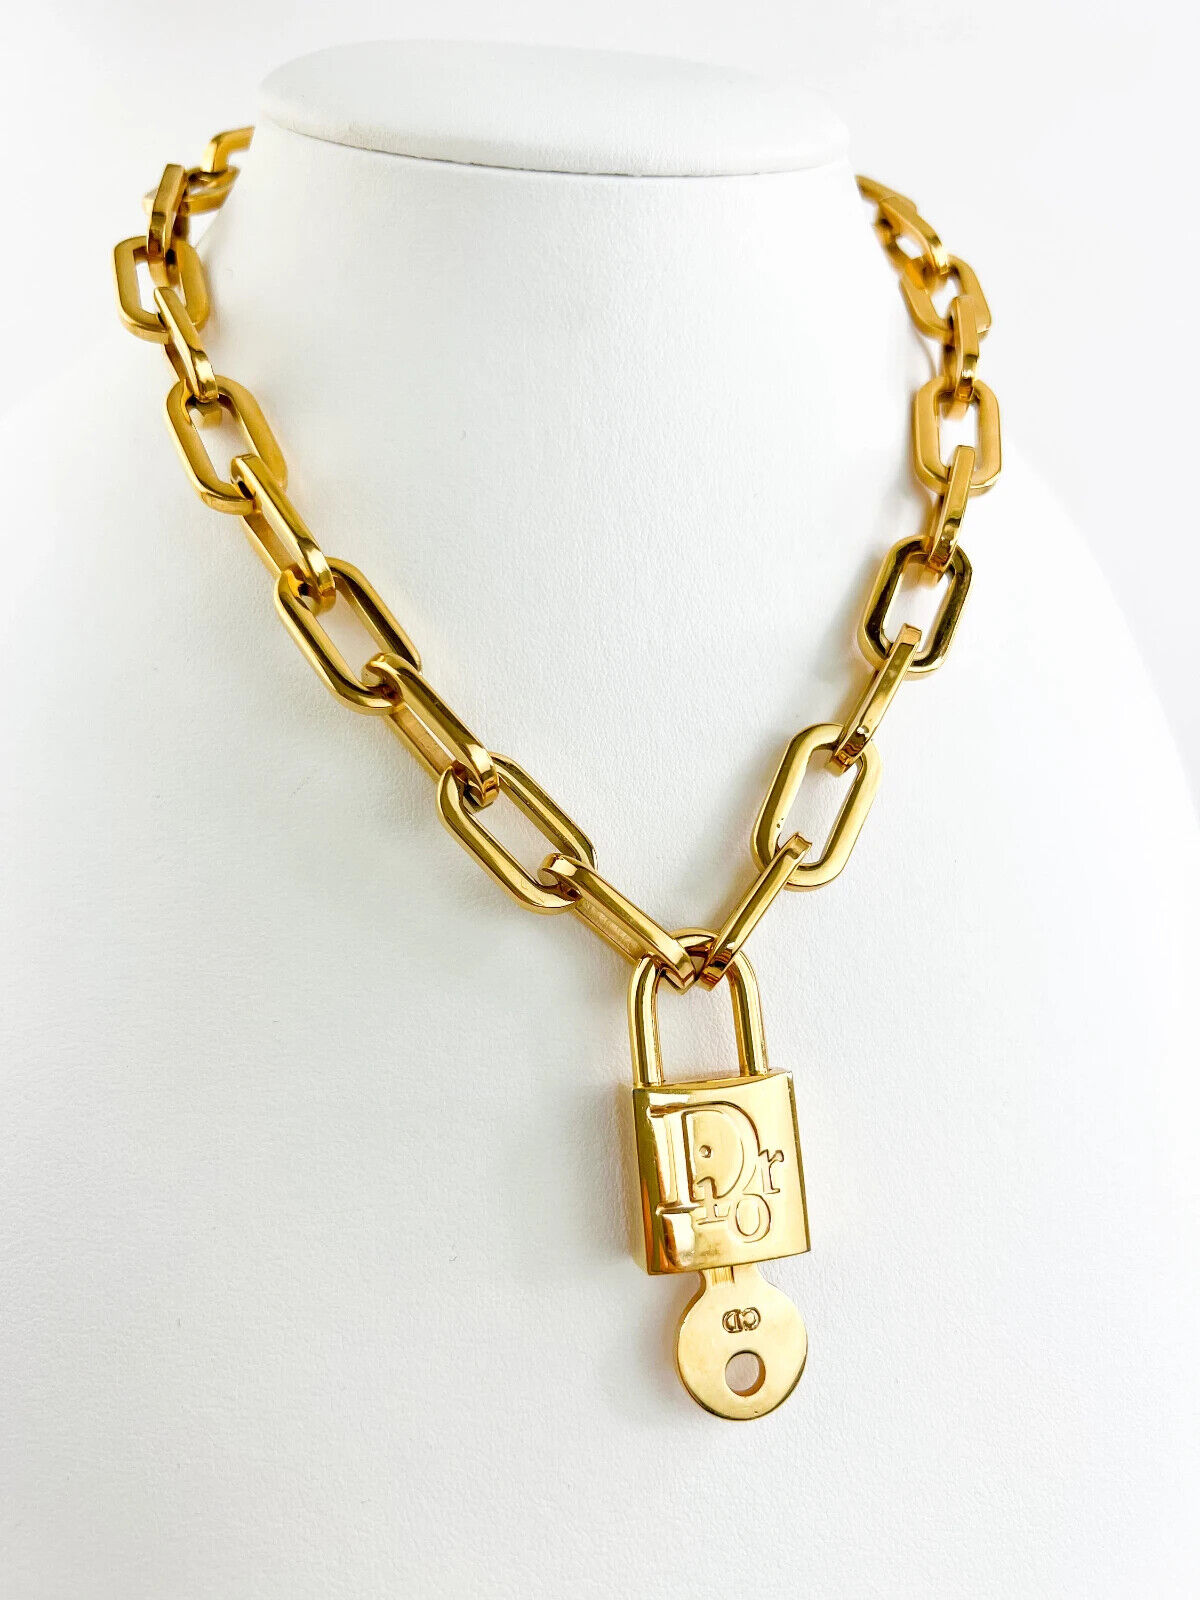 Vintage Christian Dior chunky choker Necklace Padlock key chain Necklace, Gold  Tone Chain Necklace, Necklace Unisex, Gift for him, Dior Y2K